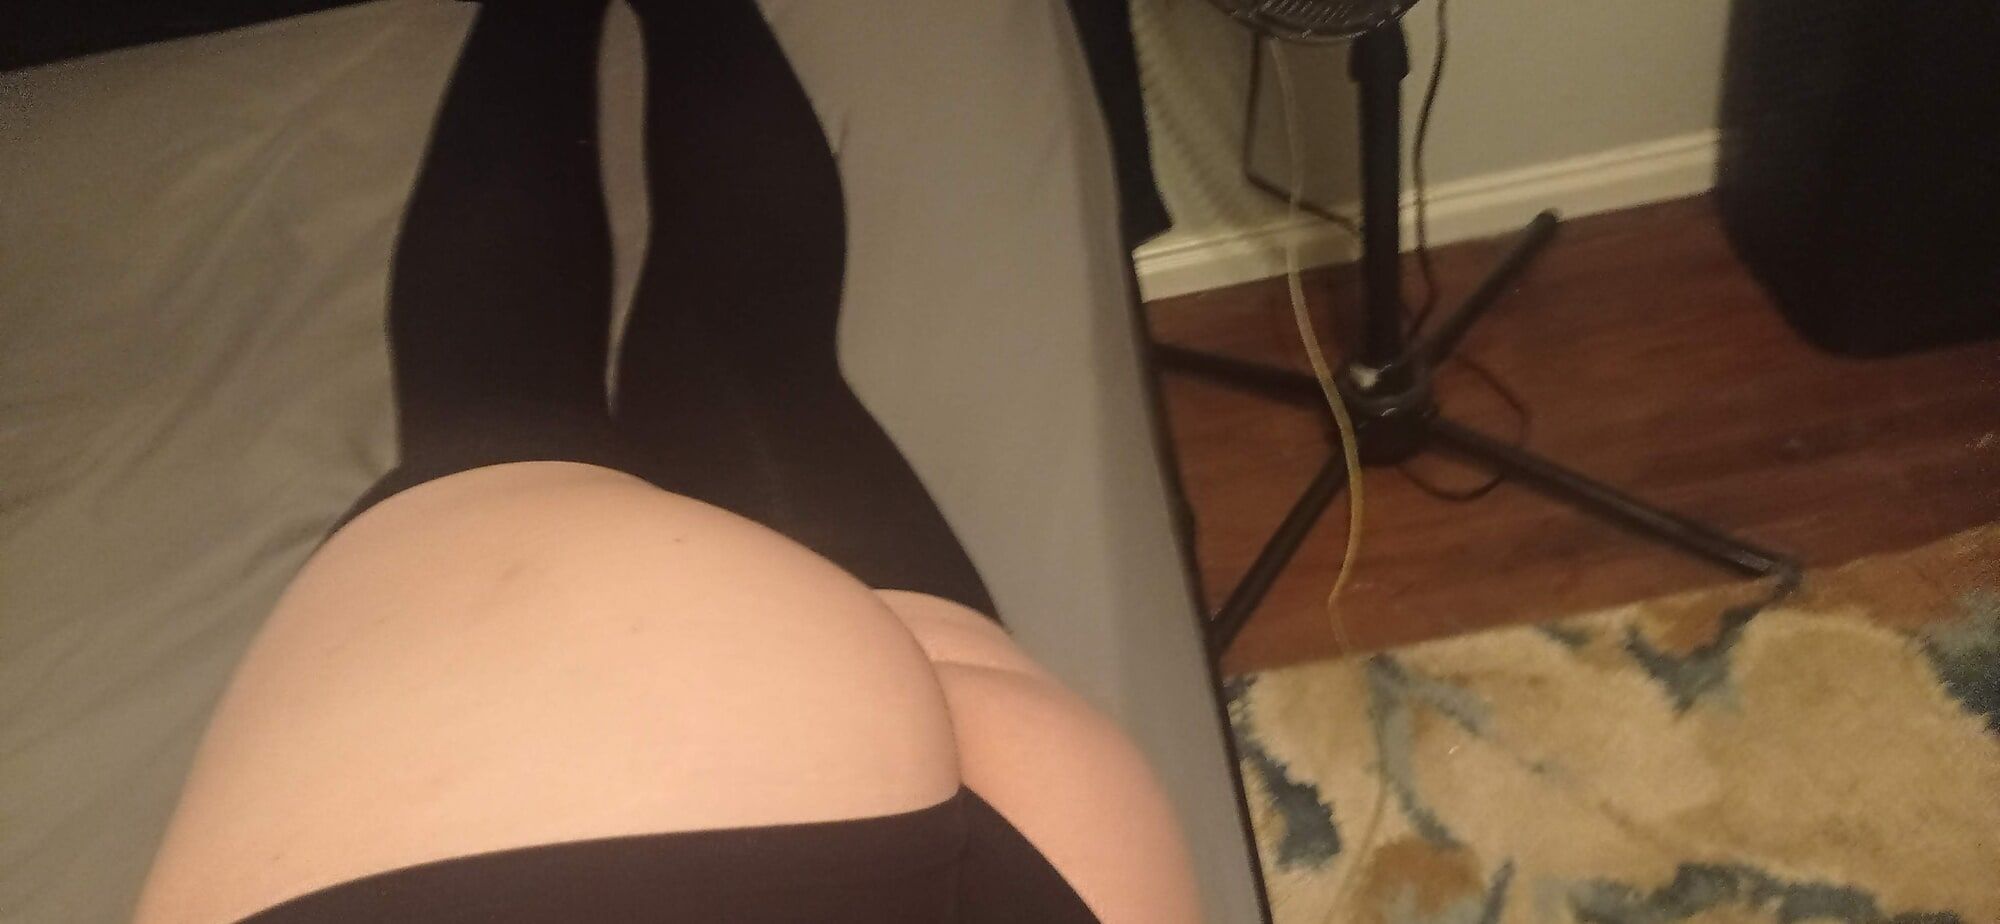 thigh highs and thong pics!